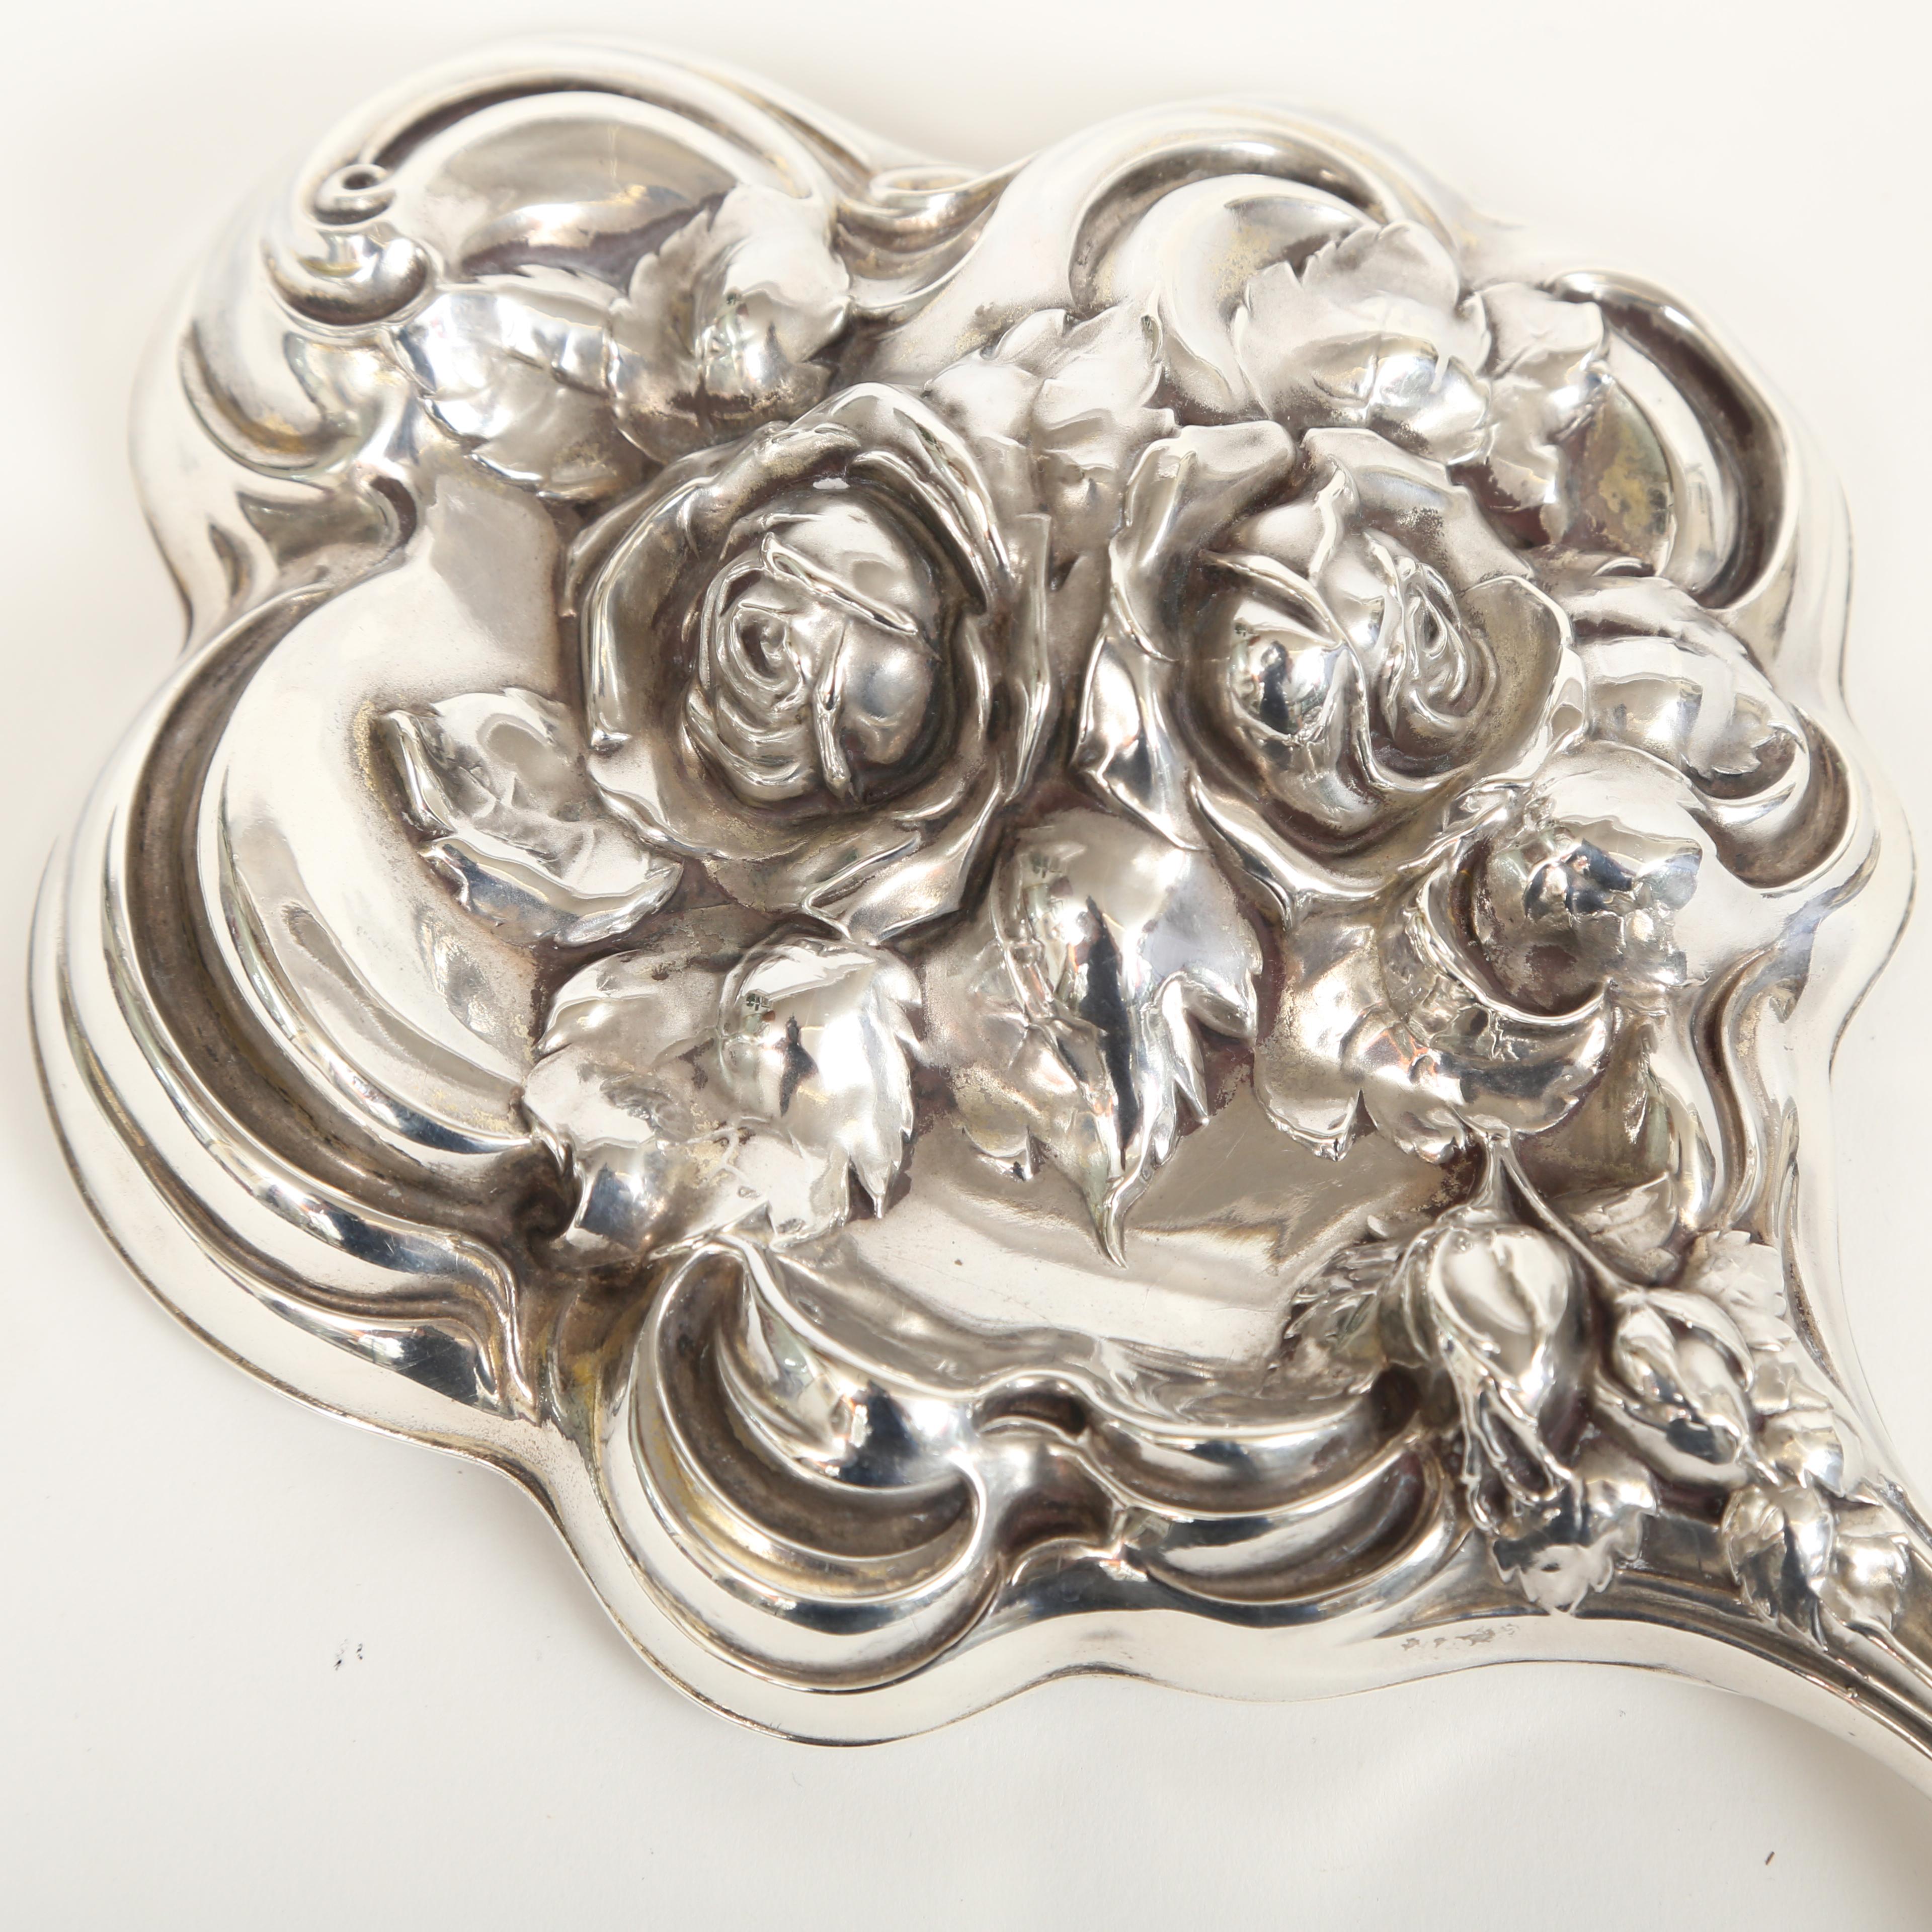 Shiebler Art Nouveau sterling hand mirror in the rose pattern. The repoussé work is in high relief. The mirror is beveled and cut to the shape of the mirror. There are some minor dents in the handle on the underside and a small scratch on the glass.